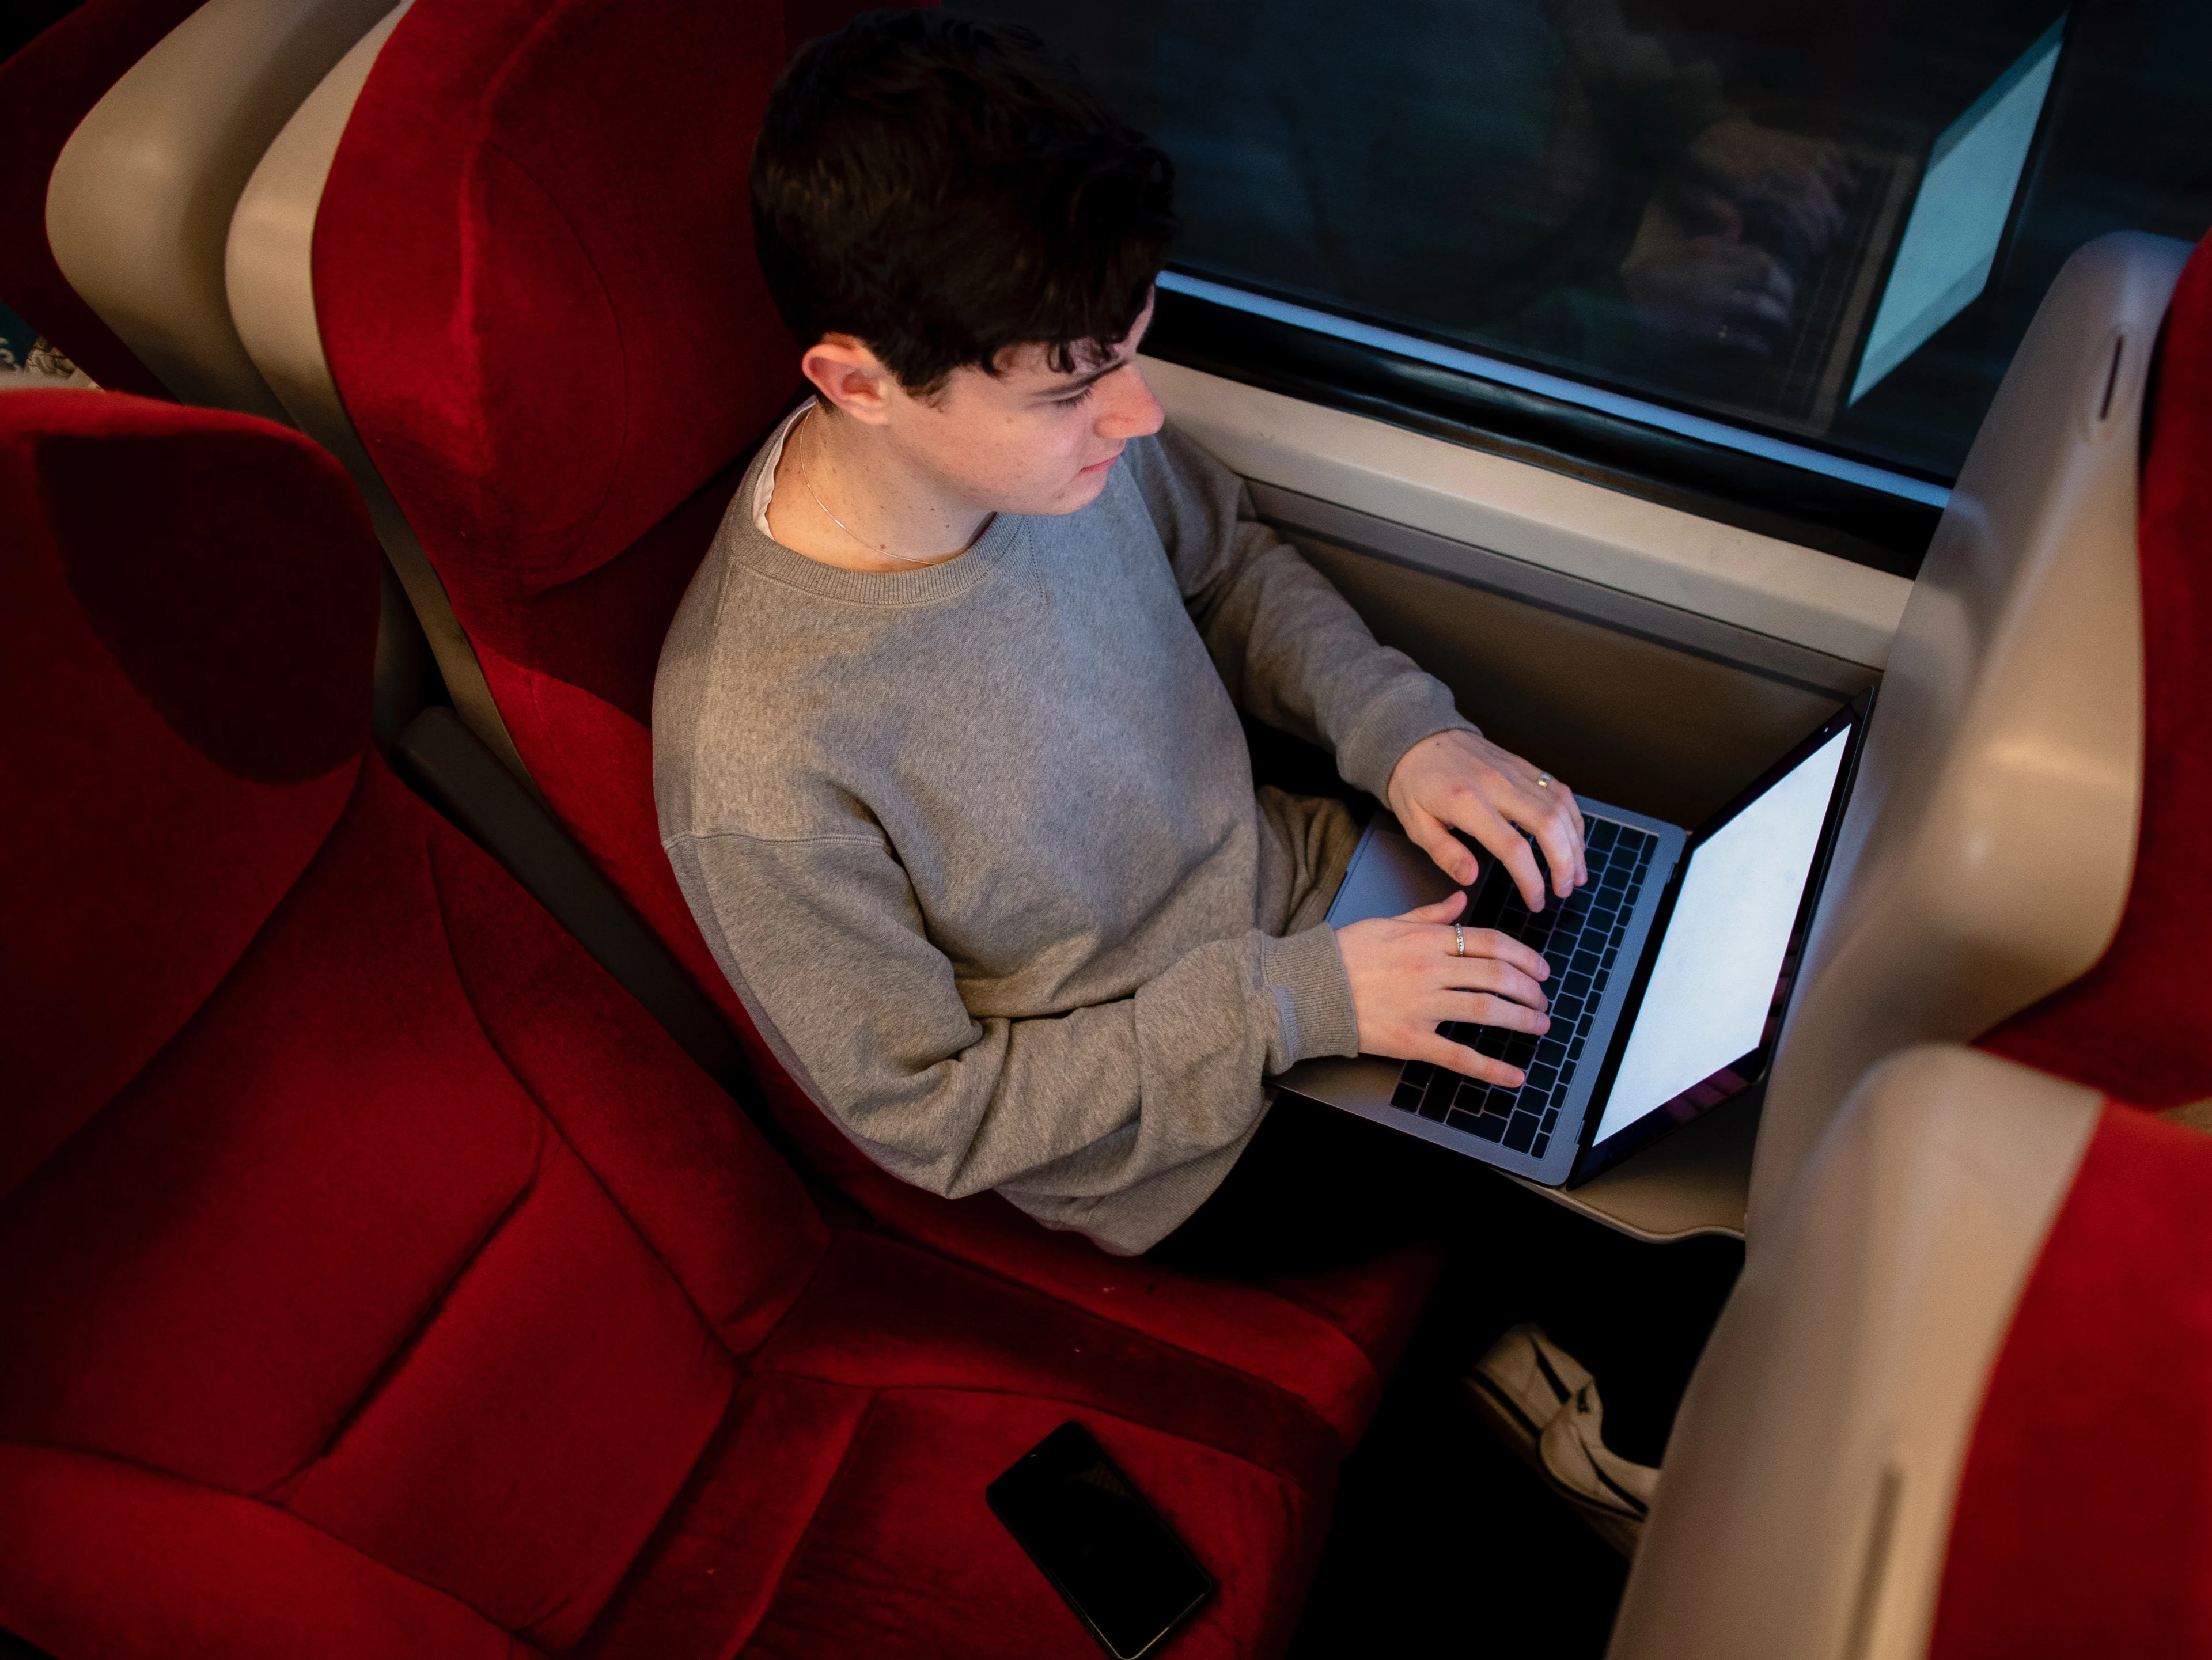 A young man working on his laptop on the train